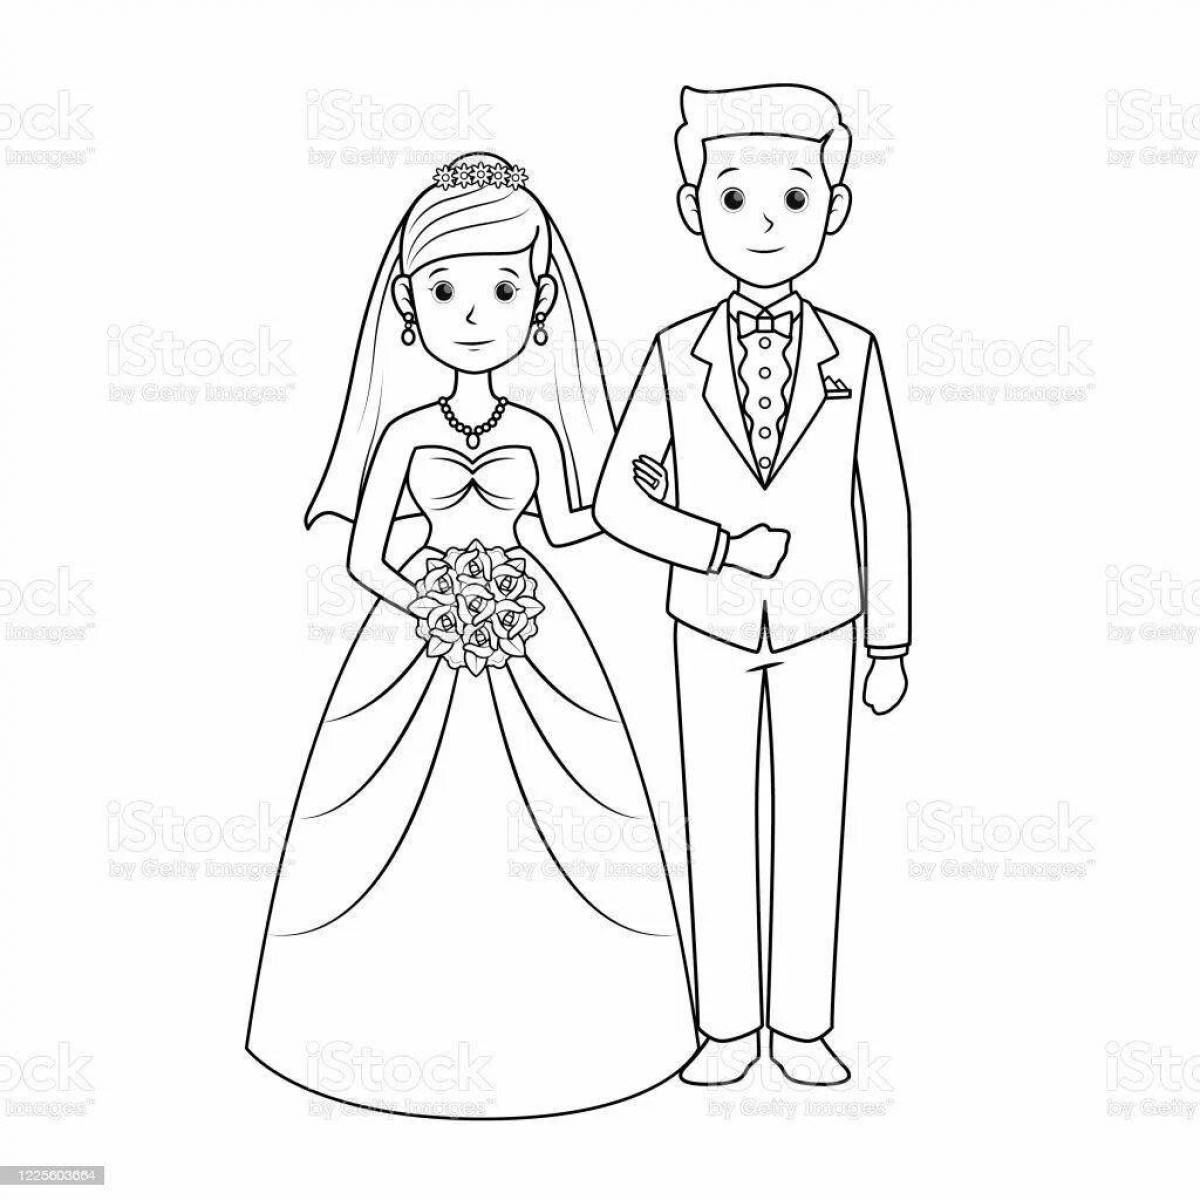 Coloring page dazzling bride and groom